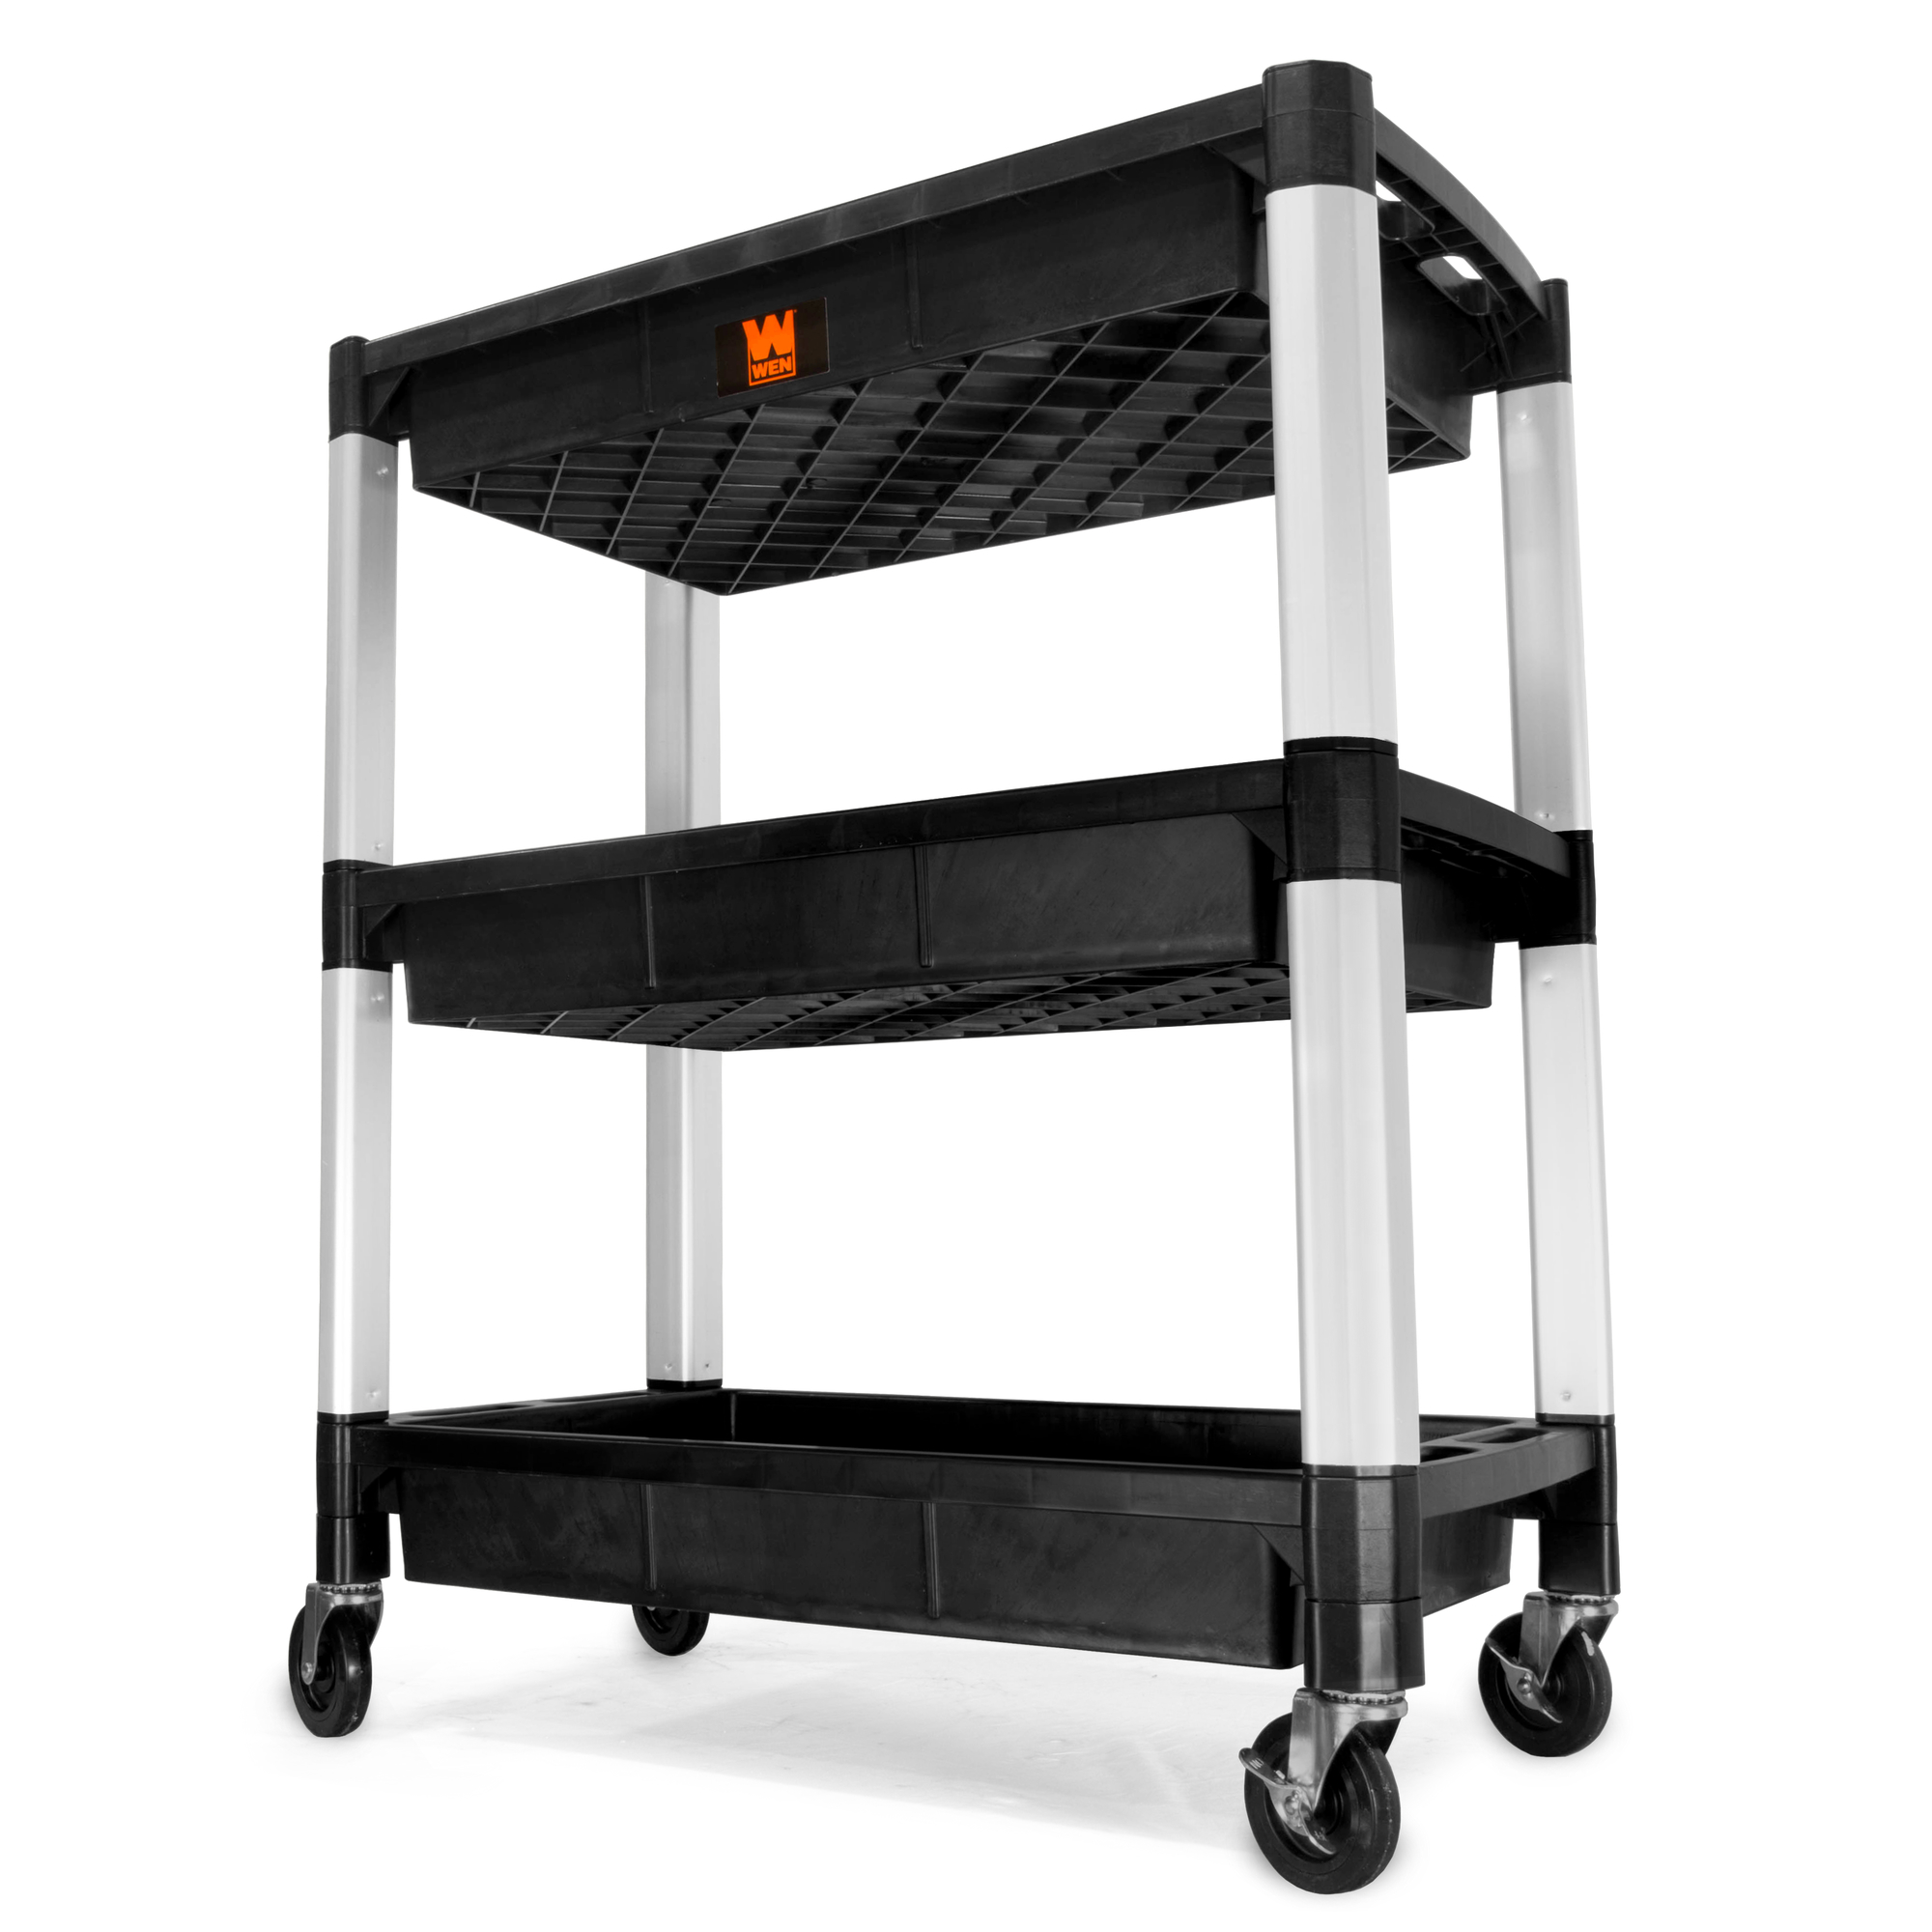 WEN, Three-Tray Triple Decker Service and Utility Cart, Total Capacity 300 lb, Shelves (qty.) 3 Material Polypropylene, Model 73163